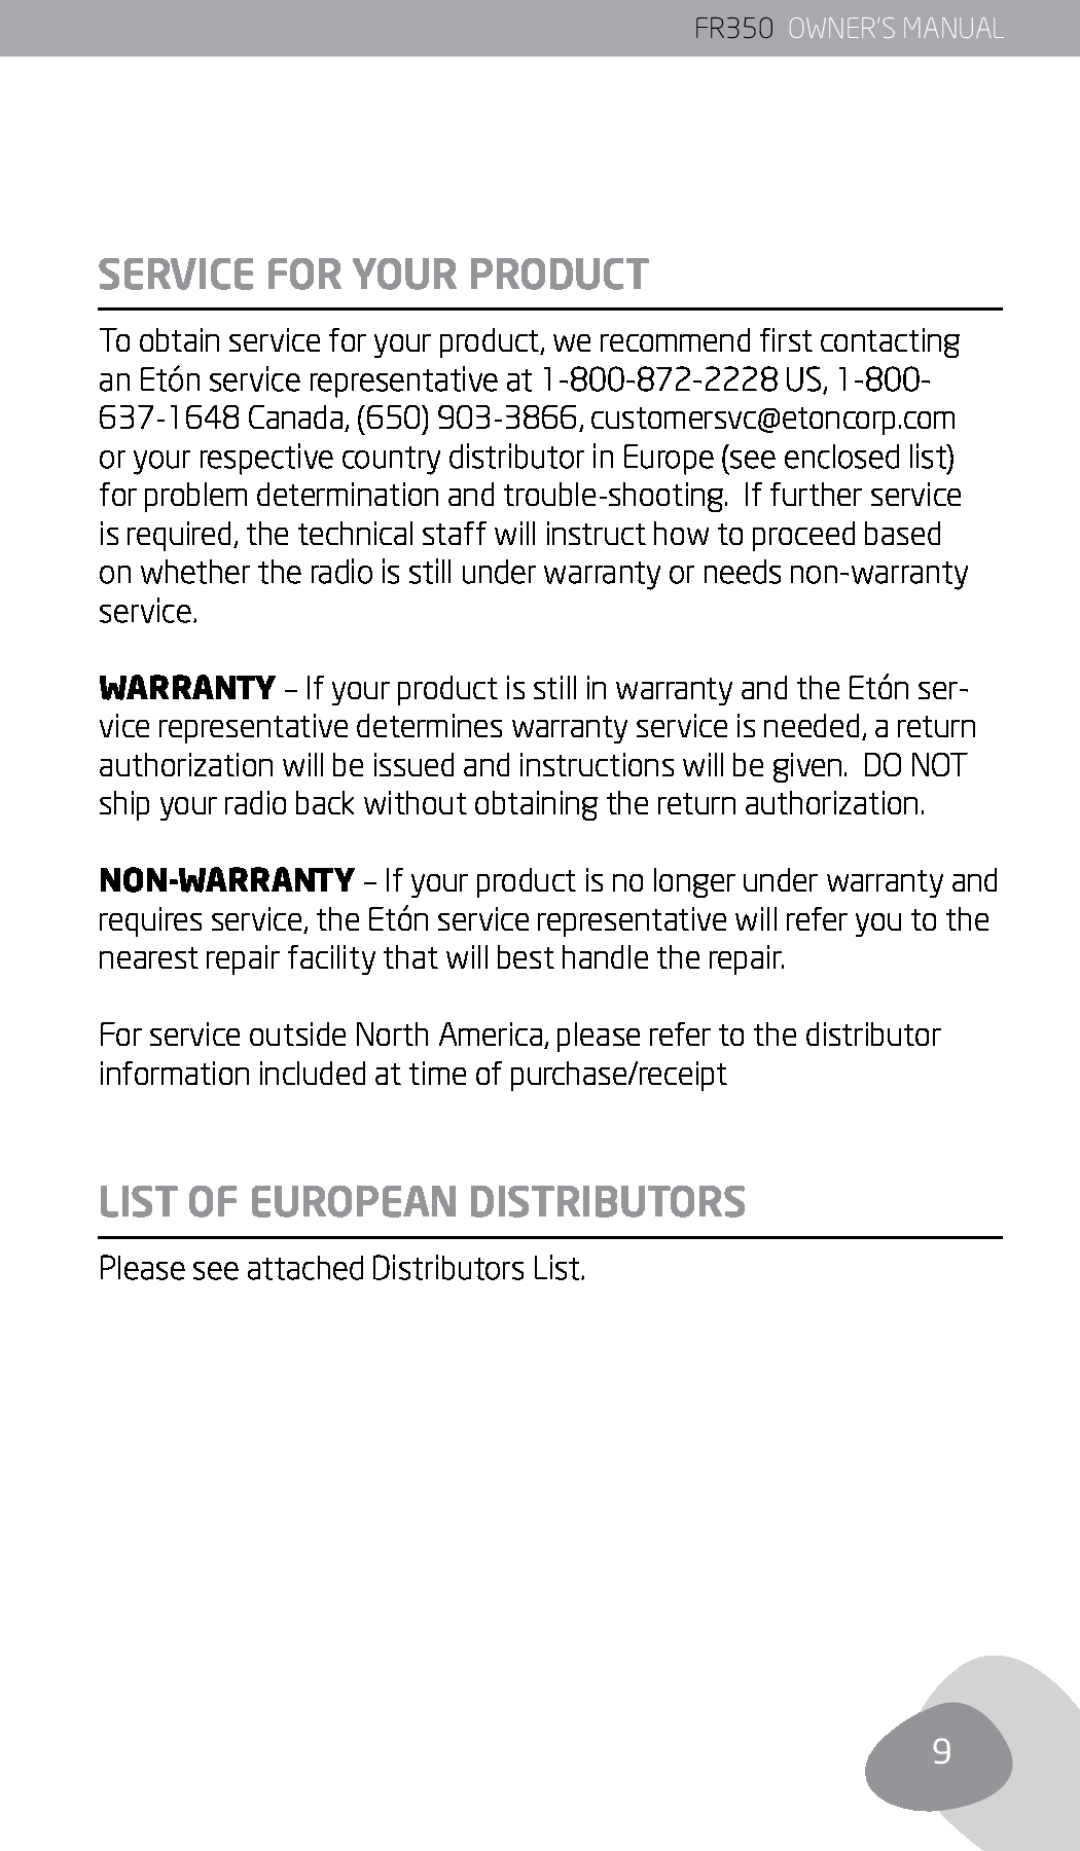 Eton FR350 owner manual Service For Your Product, List Of European Distributors, Please see attached Distributors List 